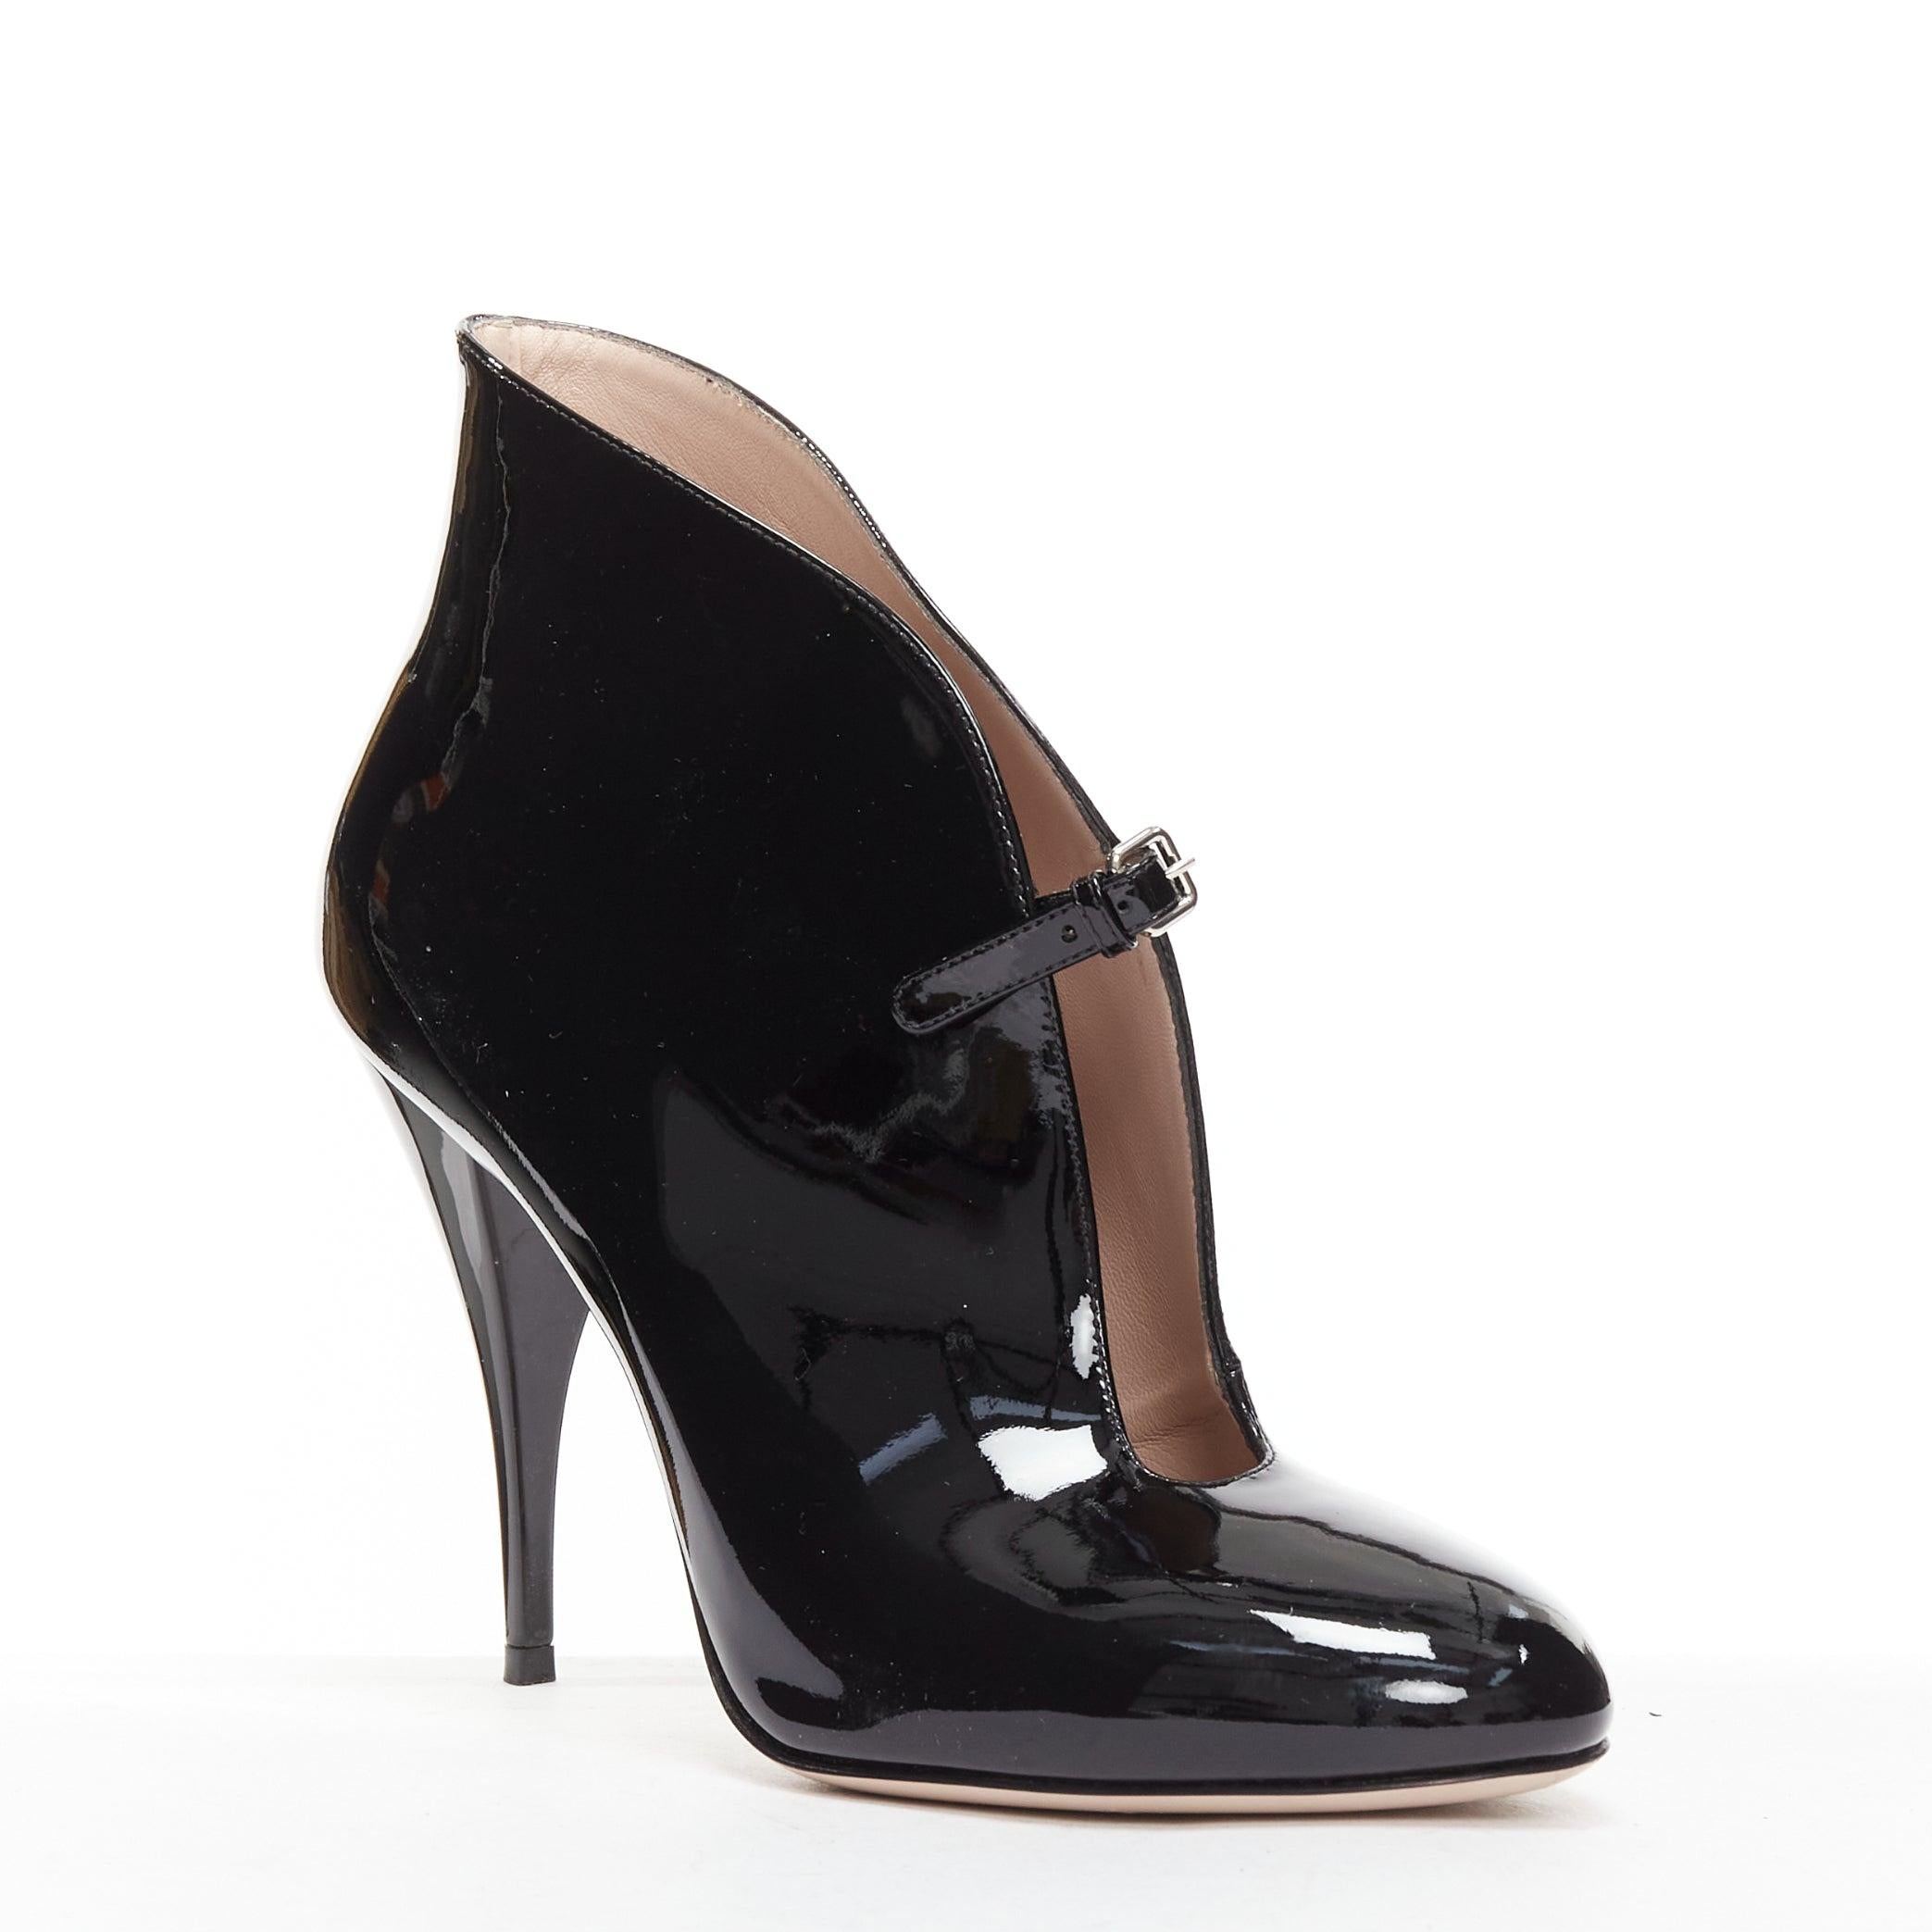 MIU MIU black patent leather low cut vamp ankle booties EU38
Reference: BSHW/A00165
Brand: Miu Miu
Designer: Miuccia Prada
Material: Patent Leather
Color: Black
Pattern: Solid
Closure: Buckle
Lining: Nude Leather
Made in: